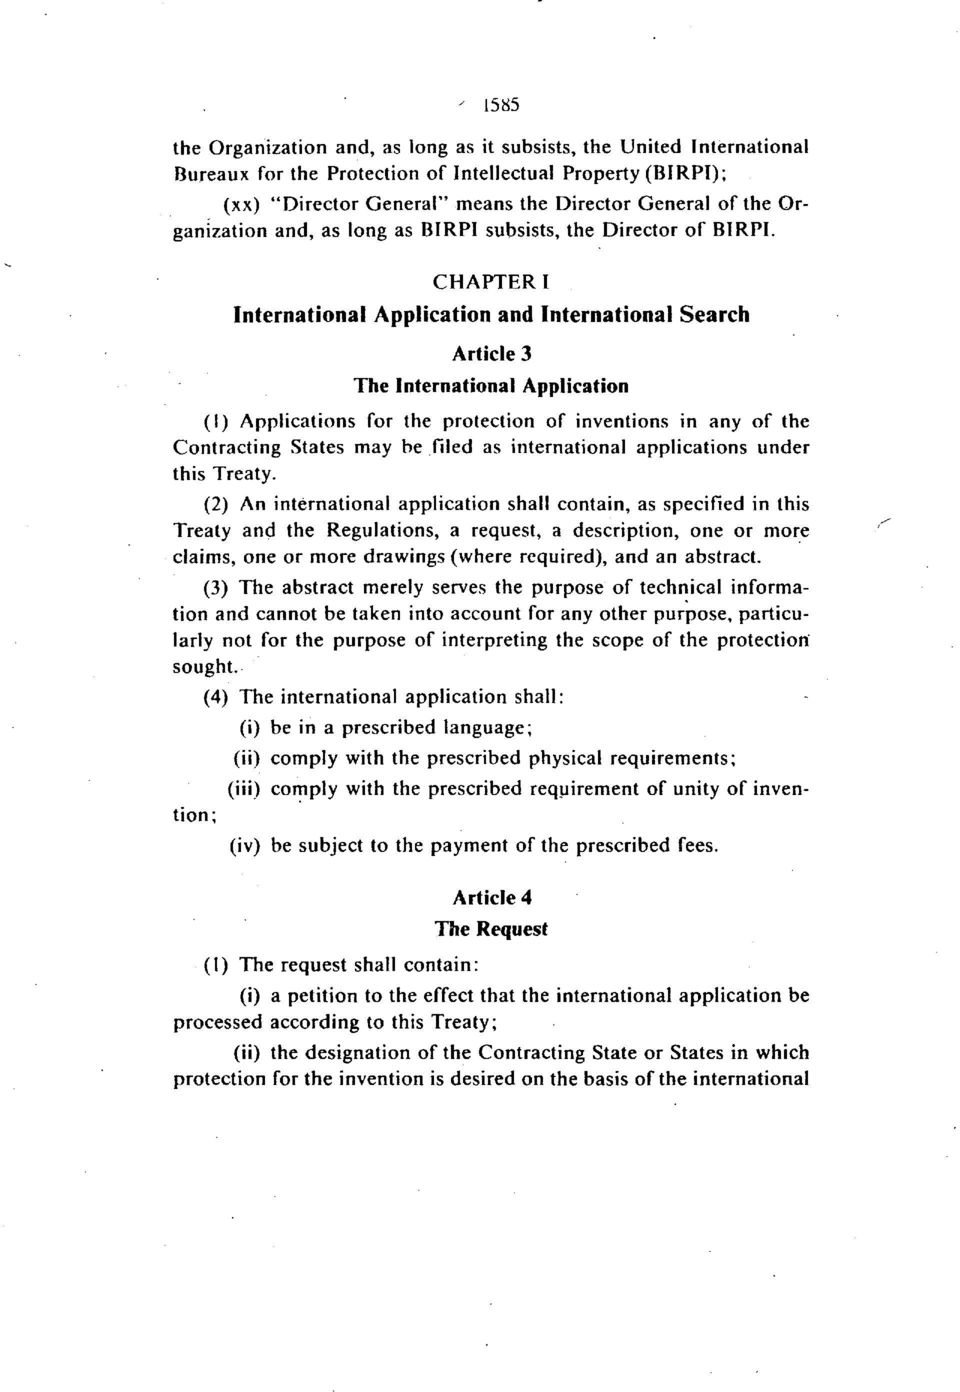 CHAPTER I International Application and International Search Article 3 The International Application (1) Applications for the protection of inventions in any of the Contracting States may be filed as